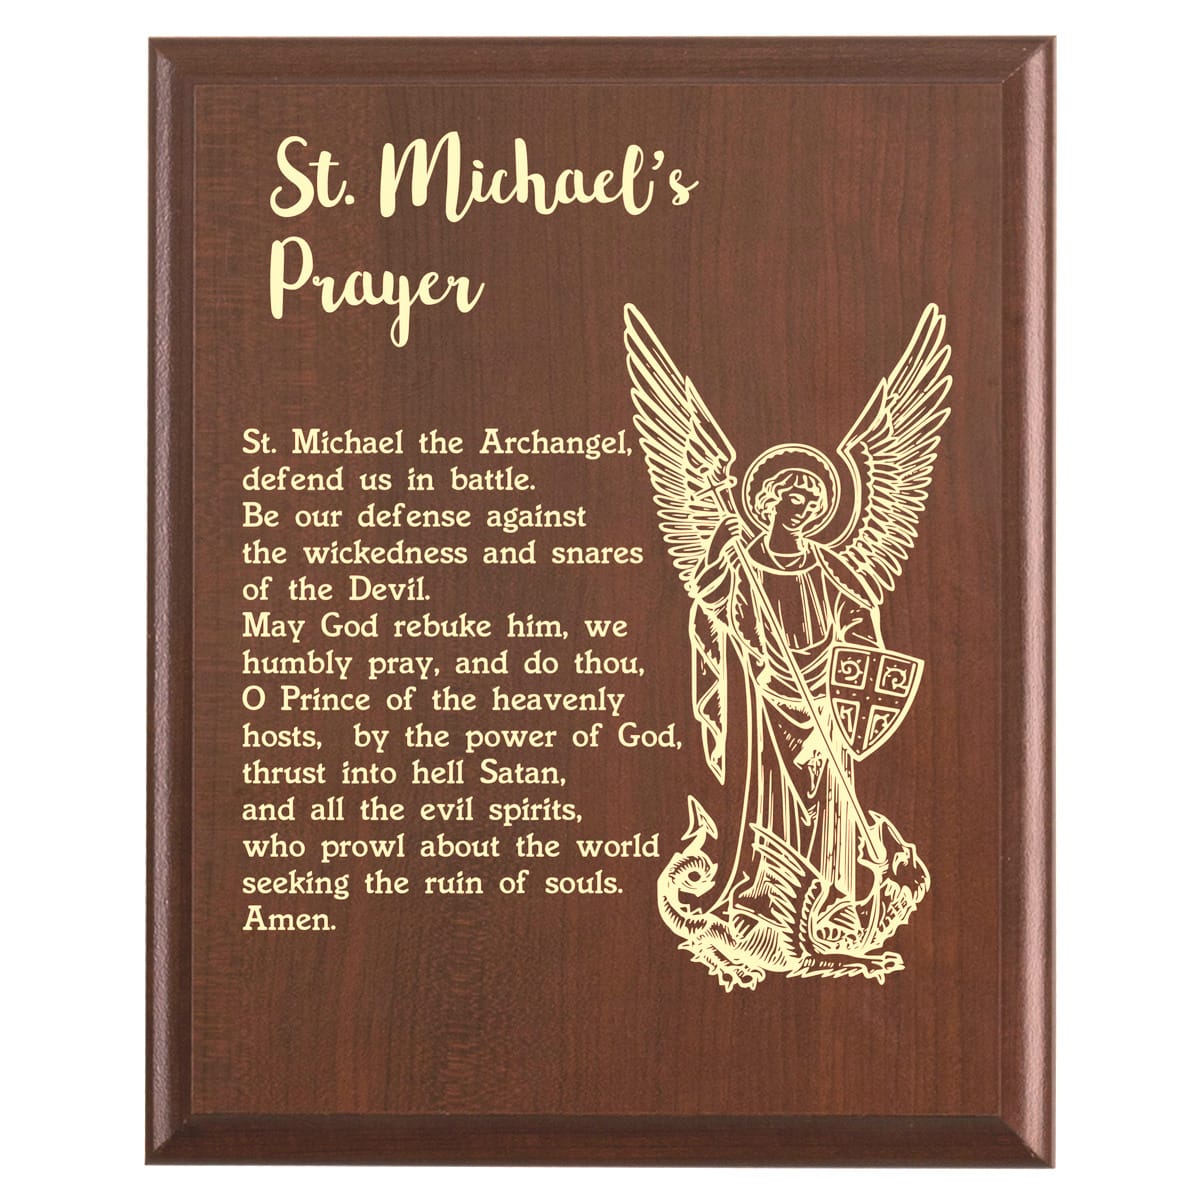 Plaque photo: St. Michael's Archangel Prayer Plaque design with free personalization. Wood style finish with customized text.